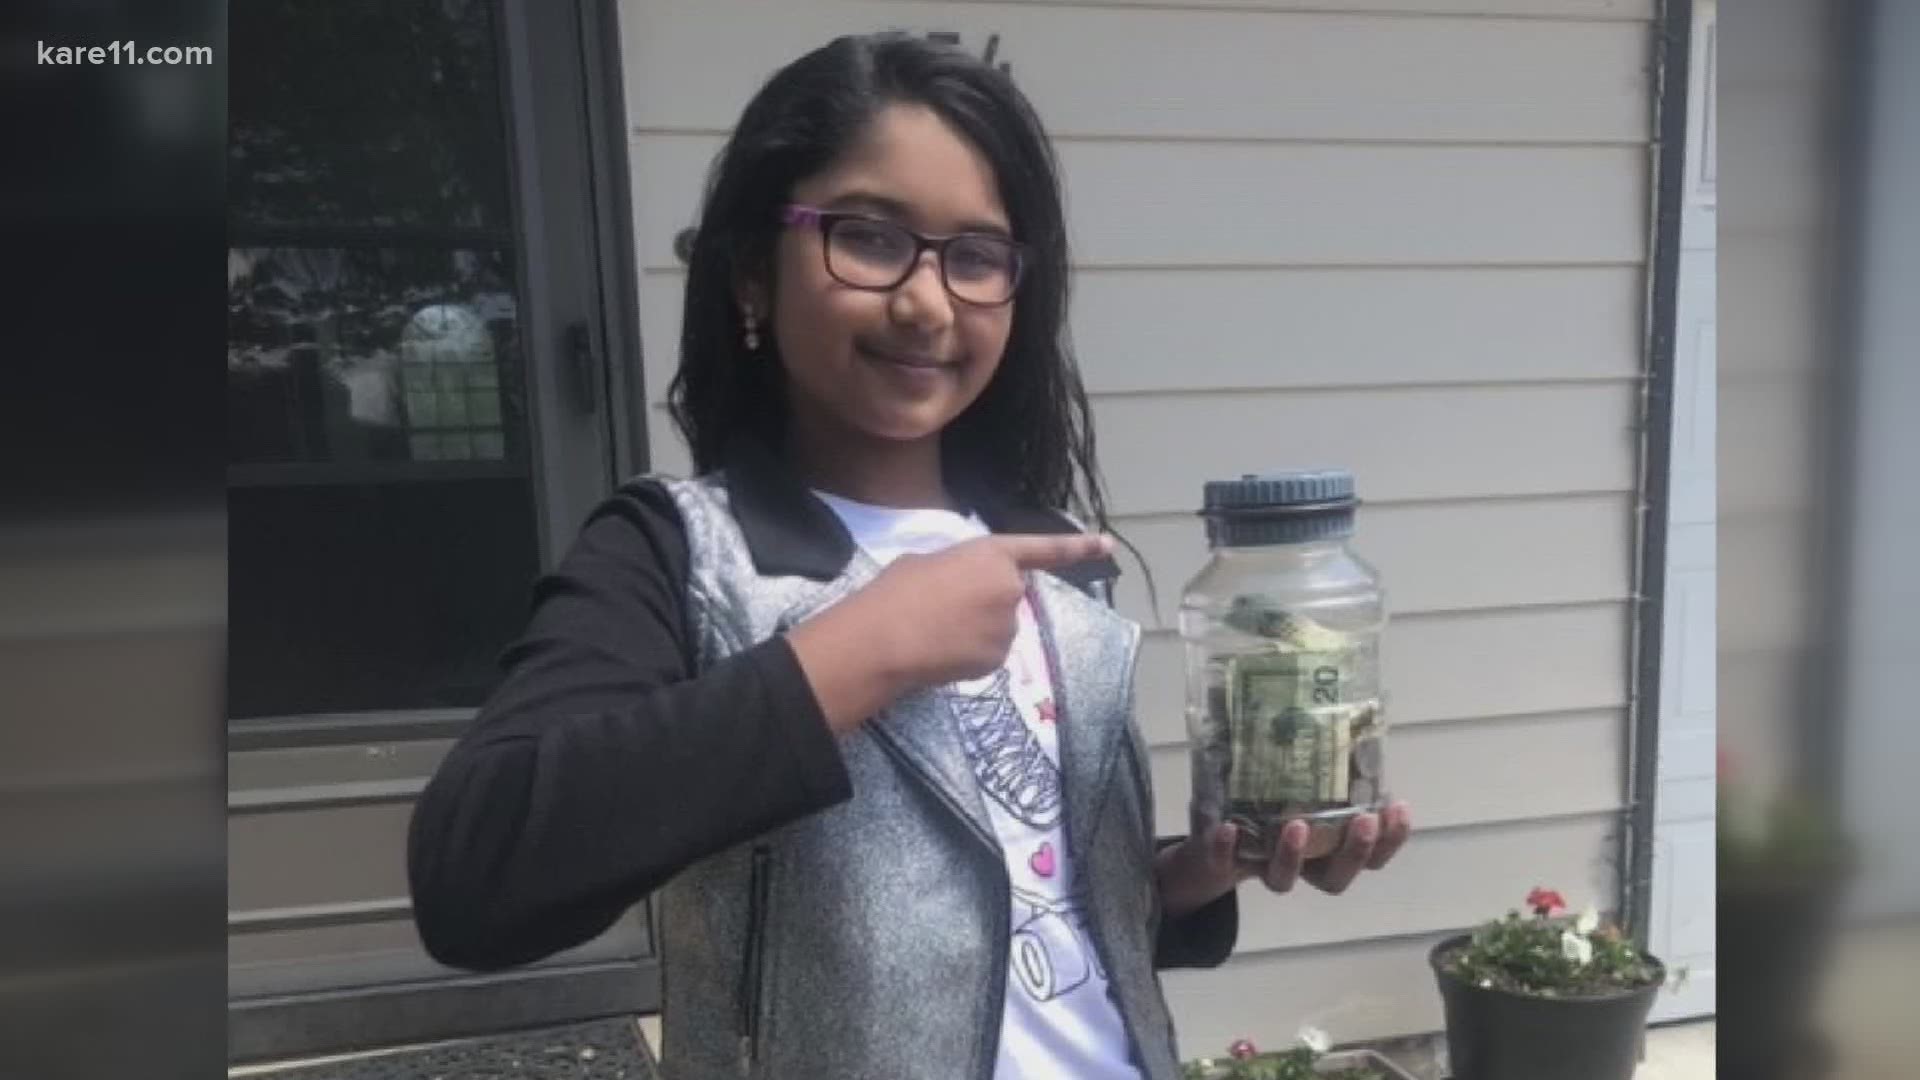 Laura Mohapatra is encouraging kids to dip into their piggy banks to help the New Yorkers hit hardest by coronavirus.